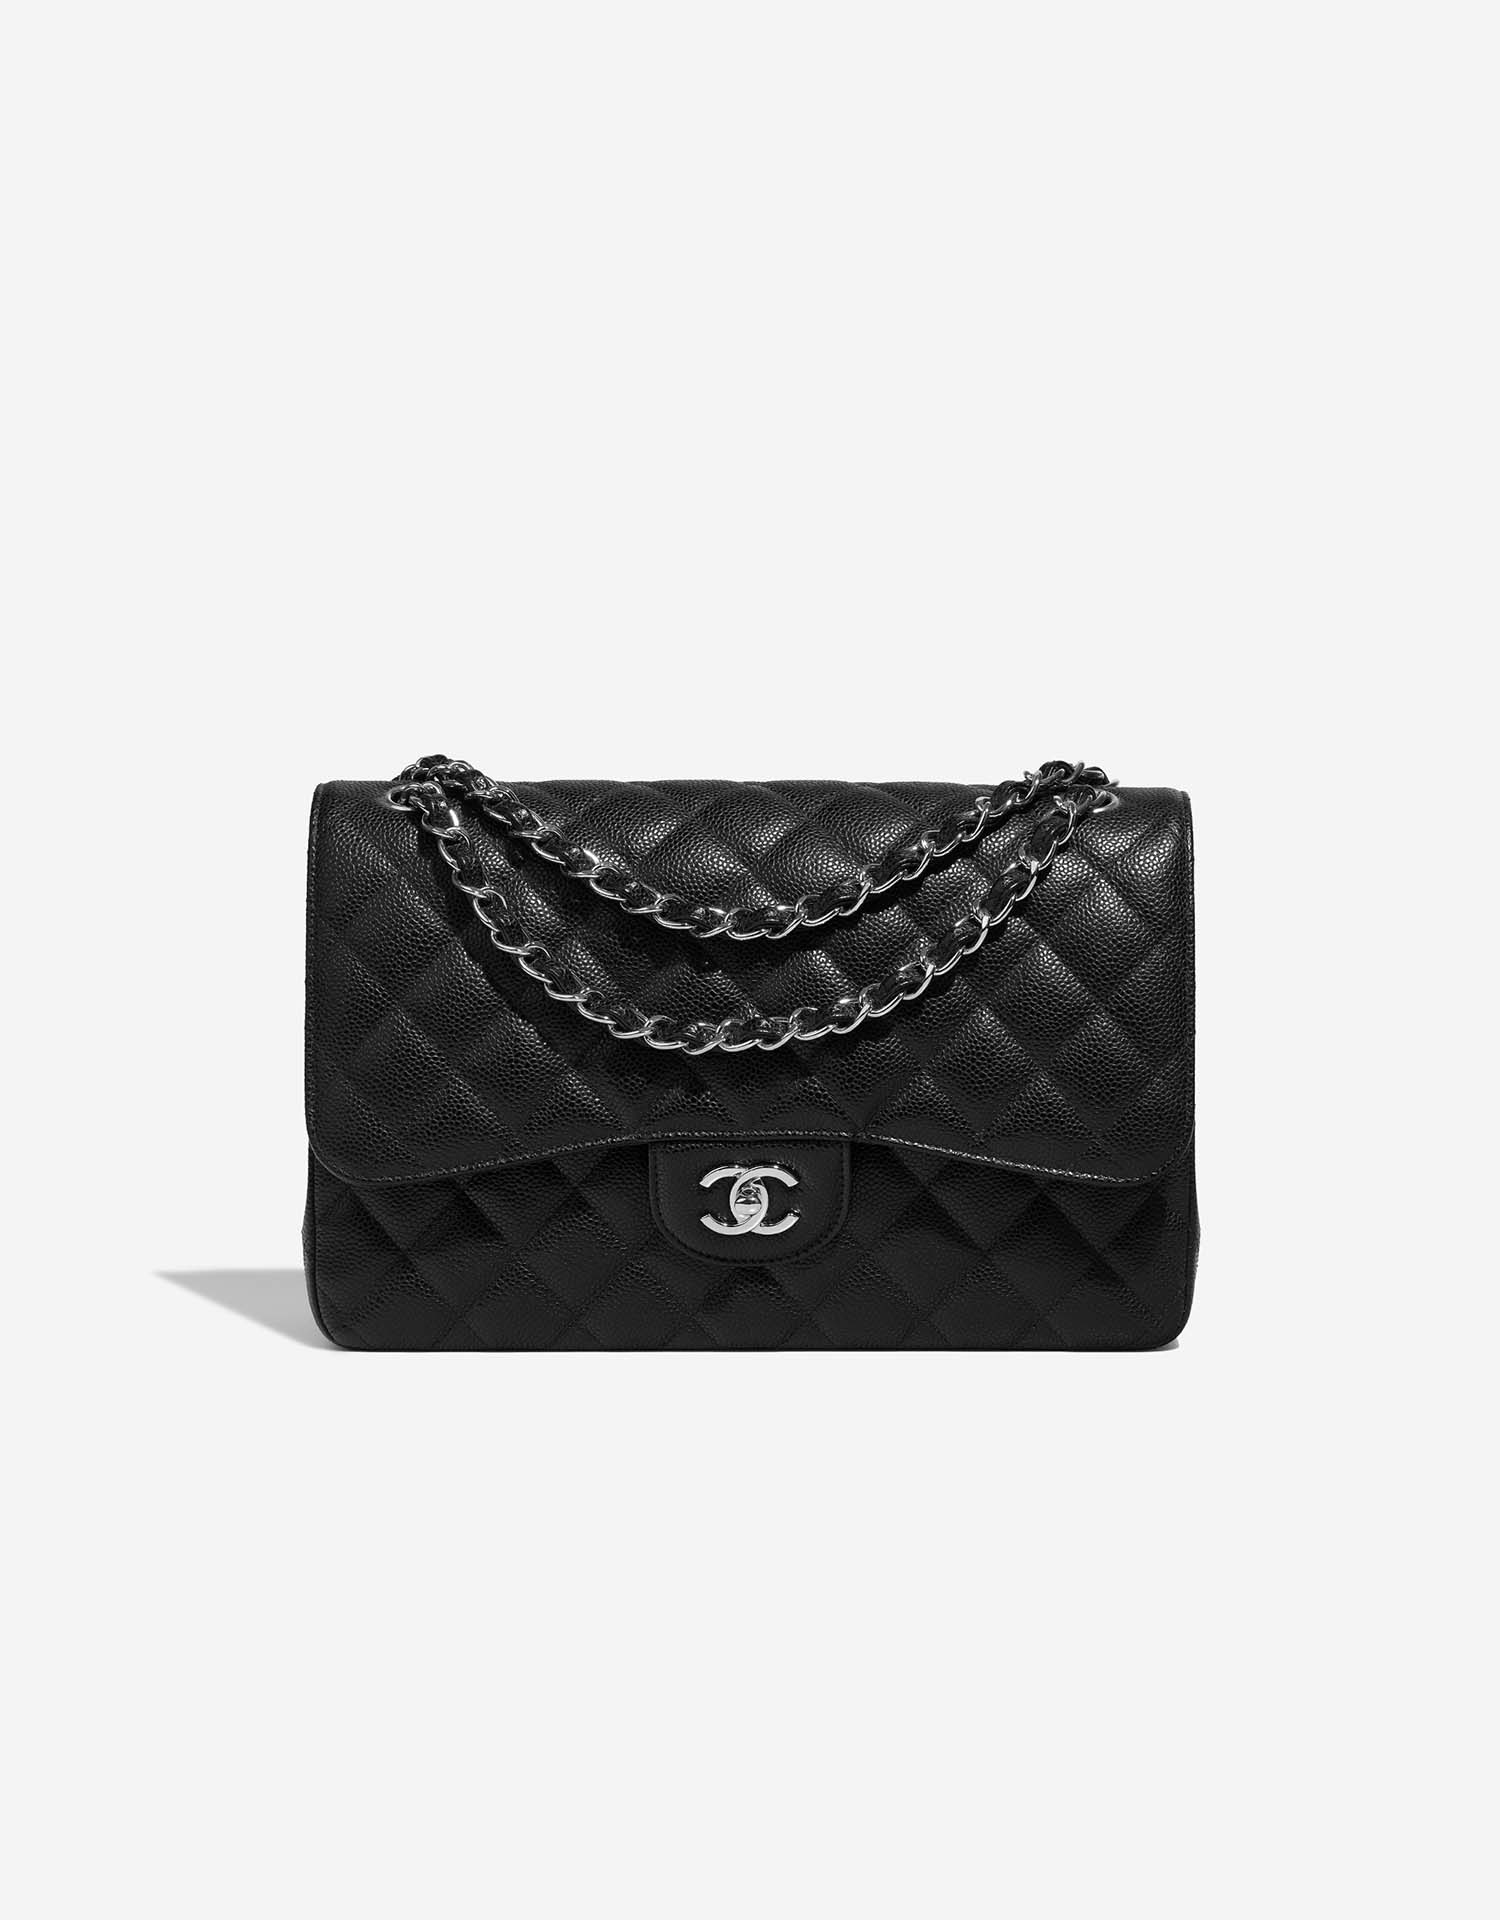 Black Quilted Caviar Jumbo Classic Double Flap Bag Silver Hardware, 2021